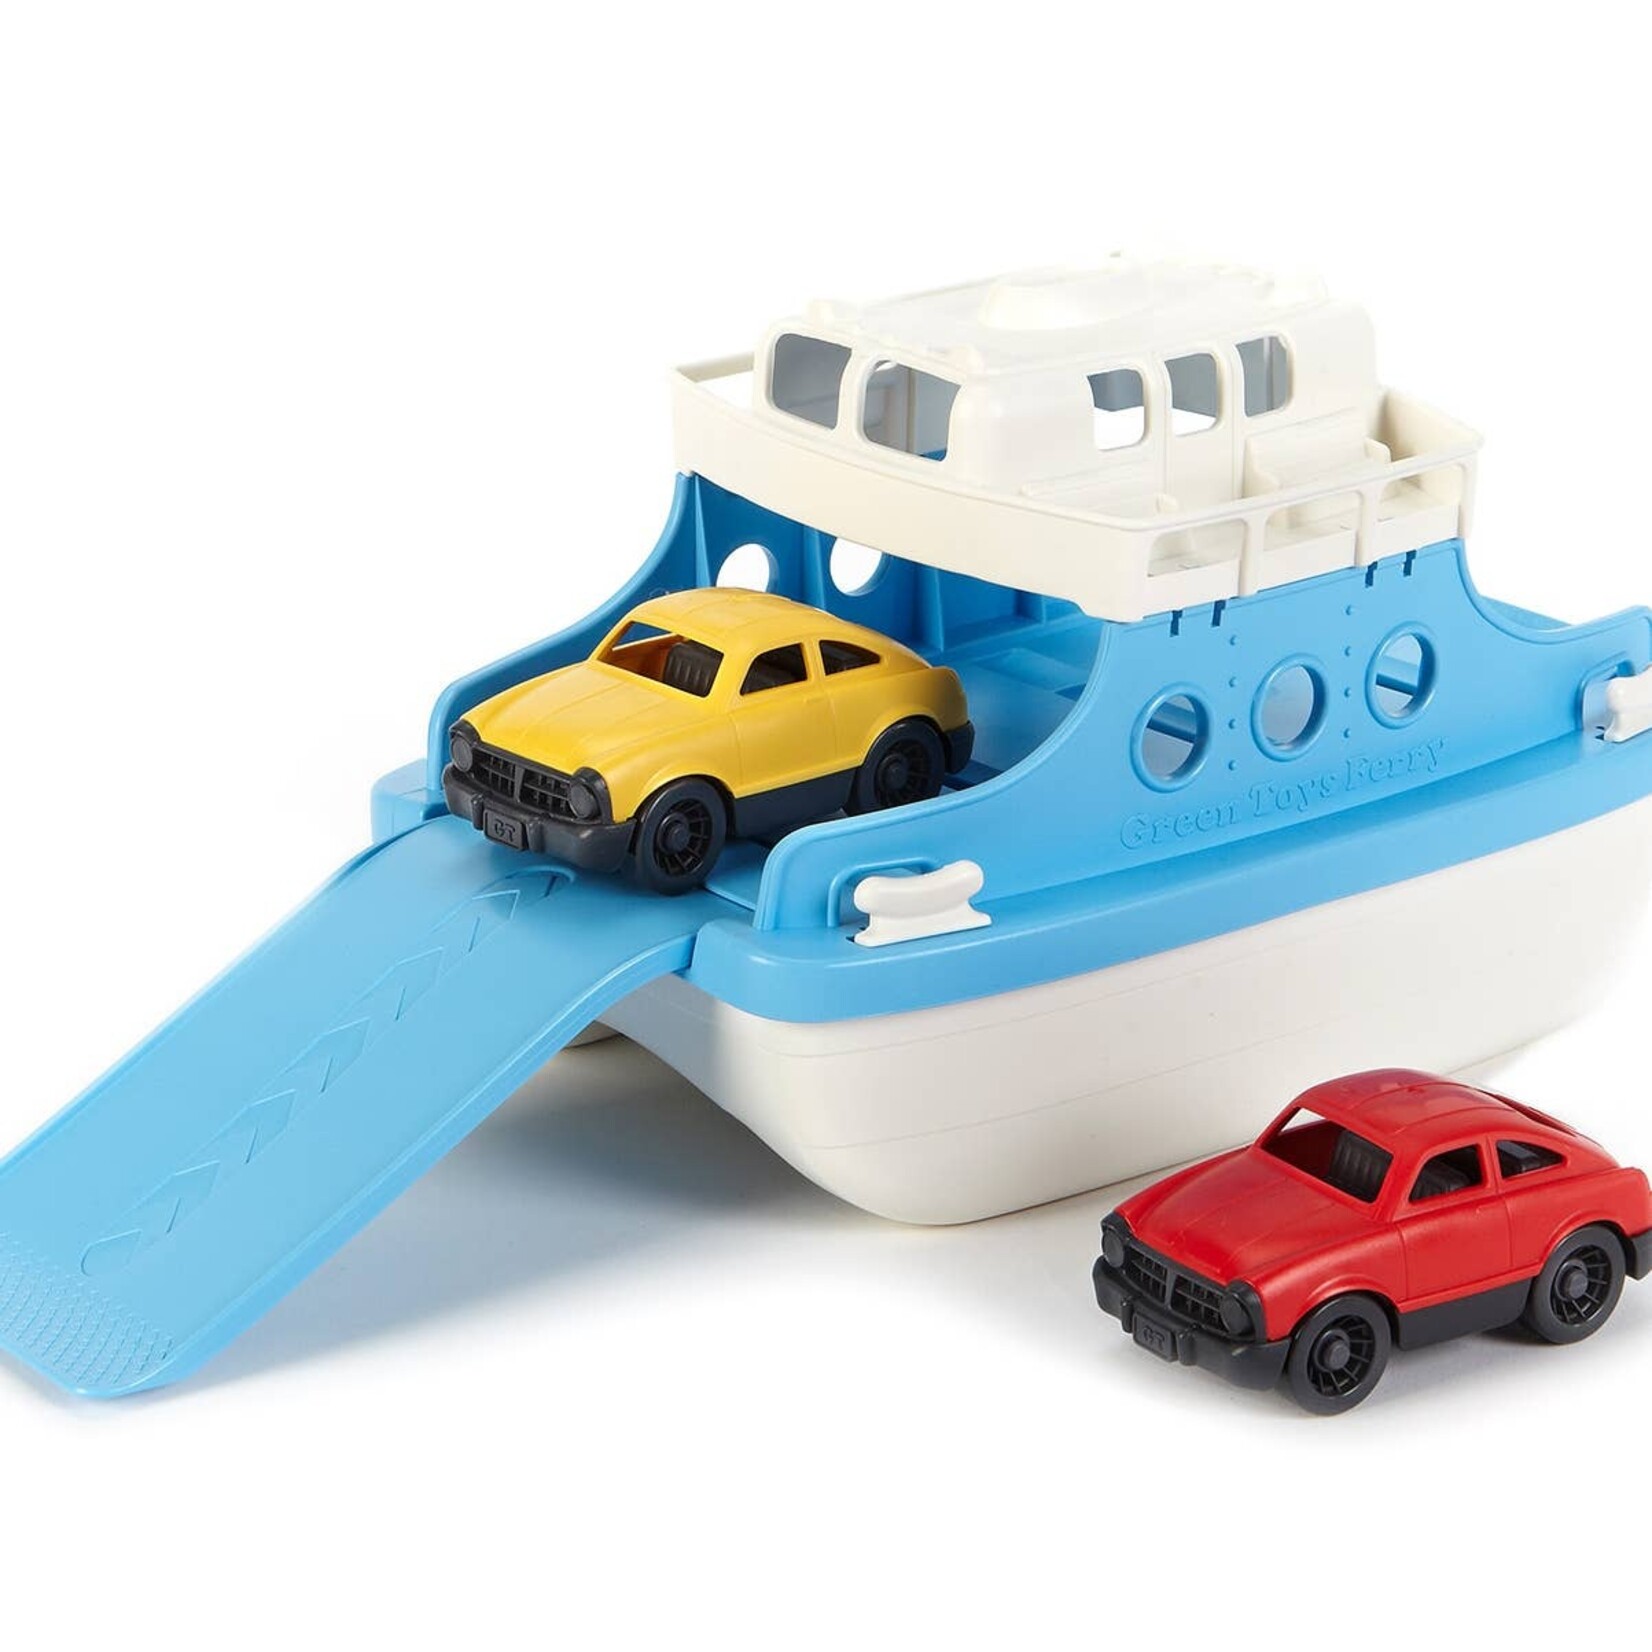 Green Toys Ferry Boat - Blue/White